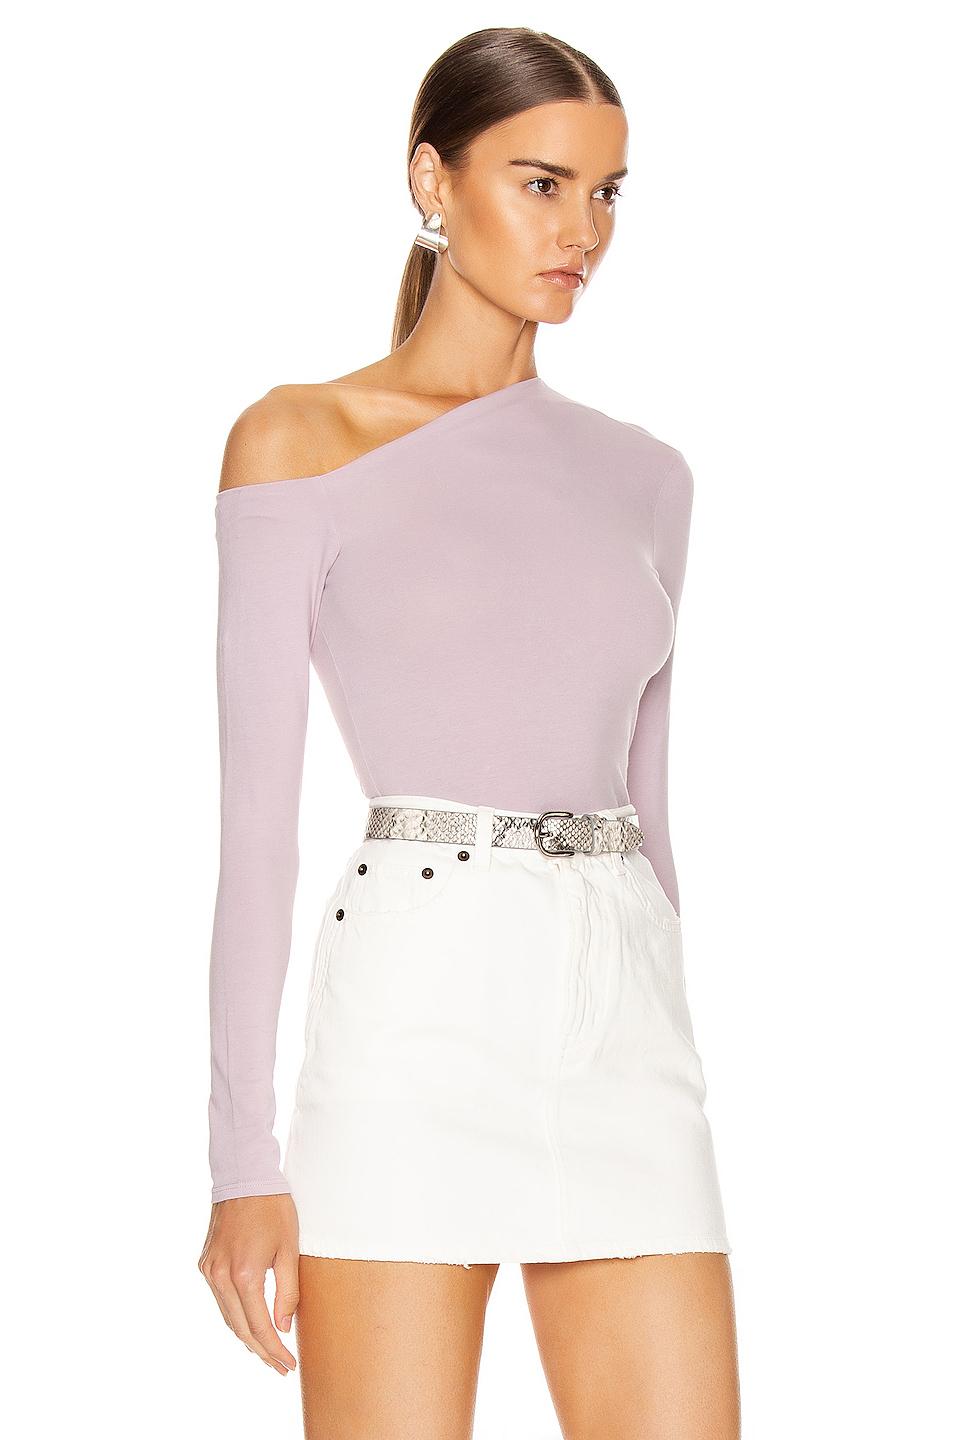 Enza Costa Cotton Angled Exposed Shoulder Long Sleeve Top in Pink - Lyst